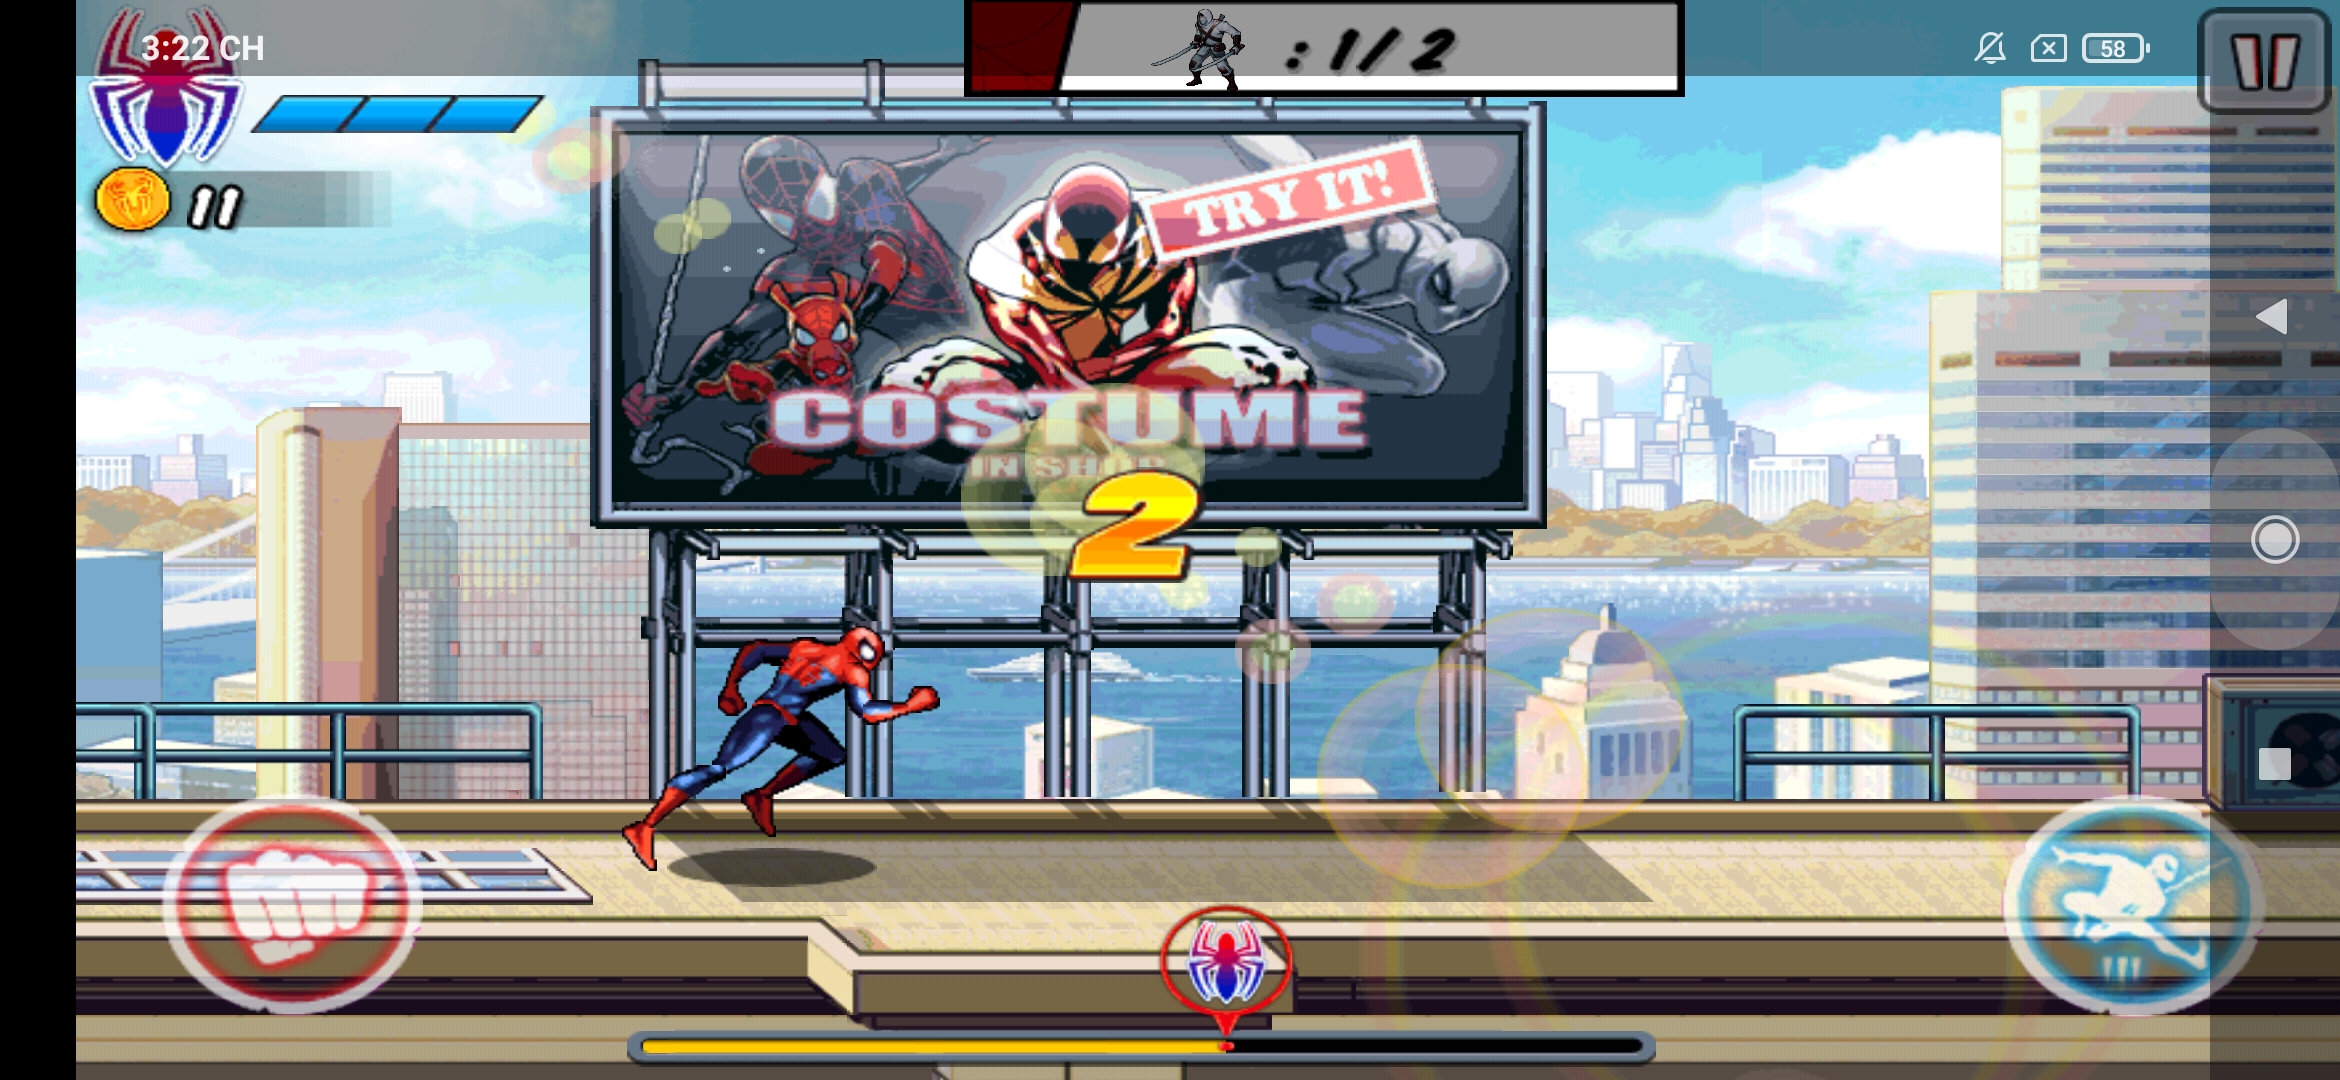 [Game Android] Spider-Man Ultimate Power Sức Mạnh Tối Thượng Tiếng Việt